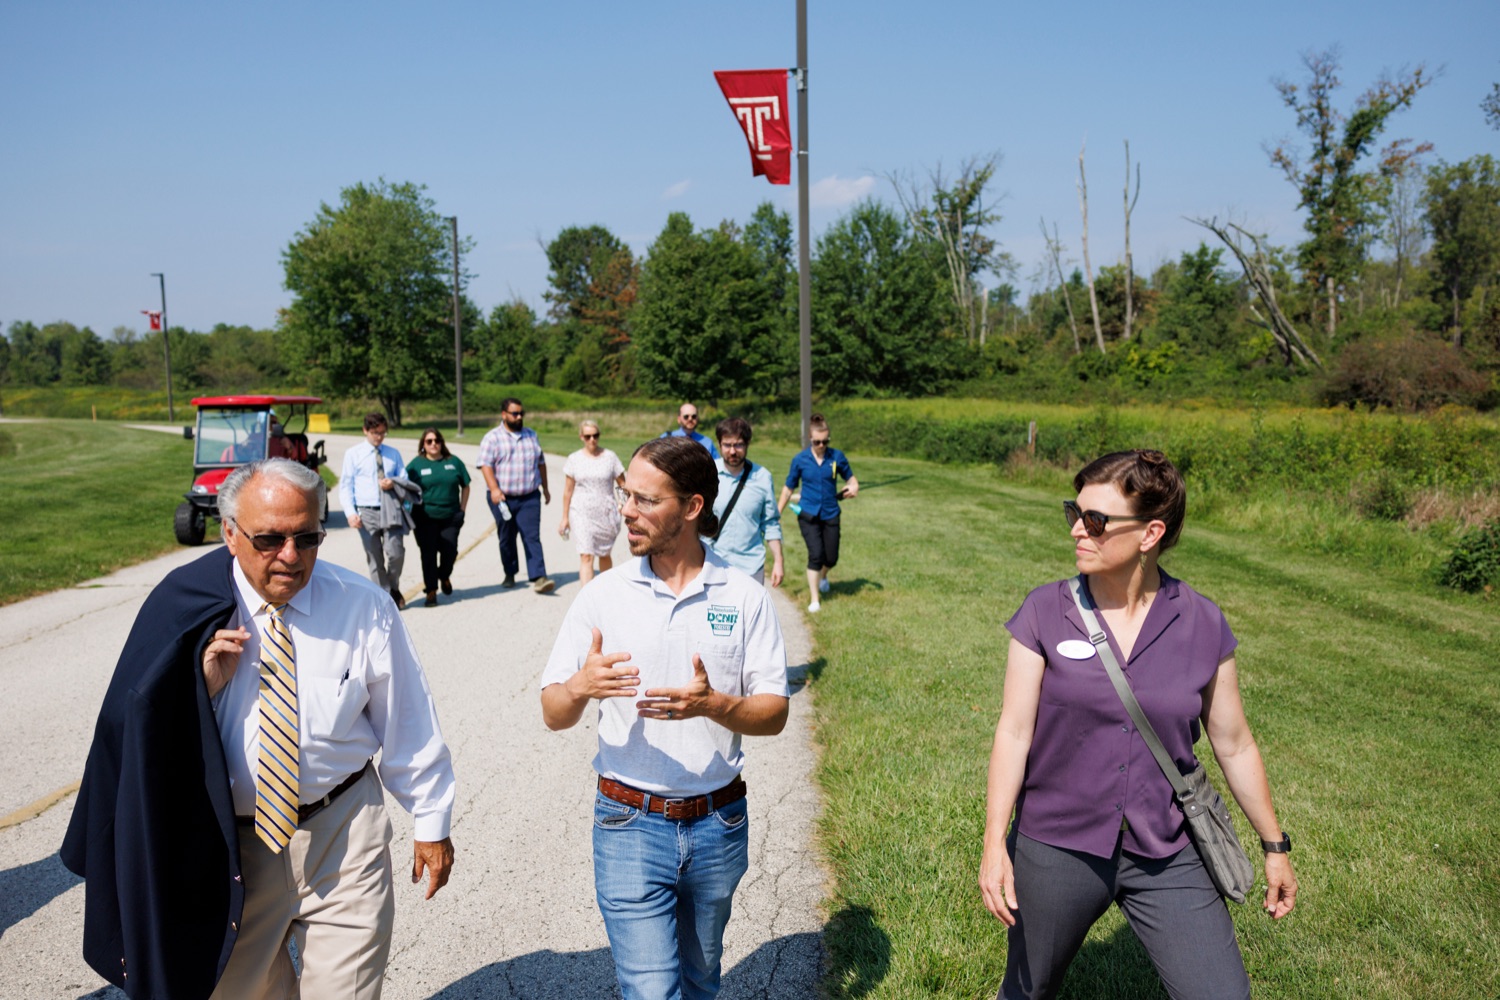 From left; House Agriculture and Rural Affairs Committee co-chair Eddie Day Pashinski; Andrew Rohrbaugh, Forest Health Section Chief at DCNR and Govs Invasive Species council member; and Dr. Lea Johnson, Associate Director, Land Stewardship and Ecology, Longwood Gardens, tour sites at Ambler Field Station where Temple University is conducting invasive species research and management on Friday, September 8, 2023.<br><a href="https://filesource.amperwave.net/commonwealthofpa/photo/23666_AGRIC_Invasive_Species_NK_024.JPG" target="_blank">⇣ Download Photo</a>